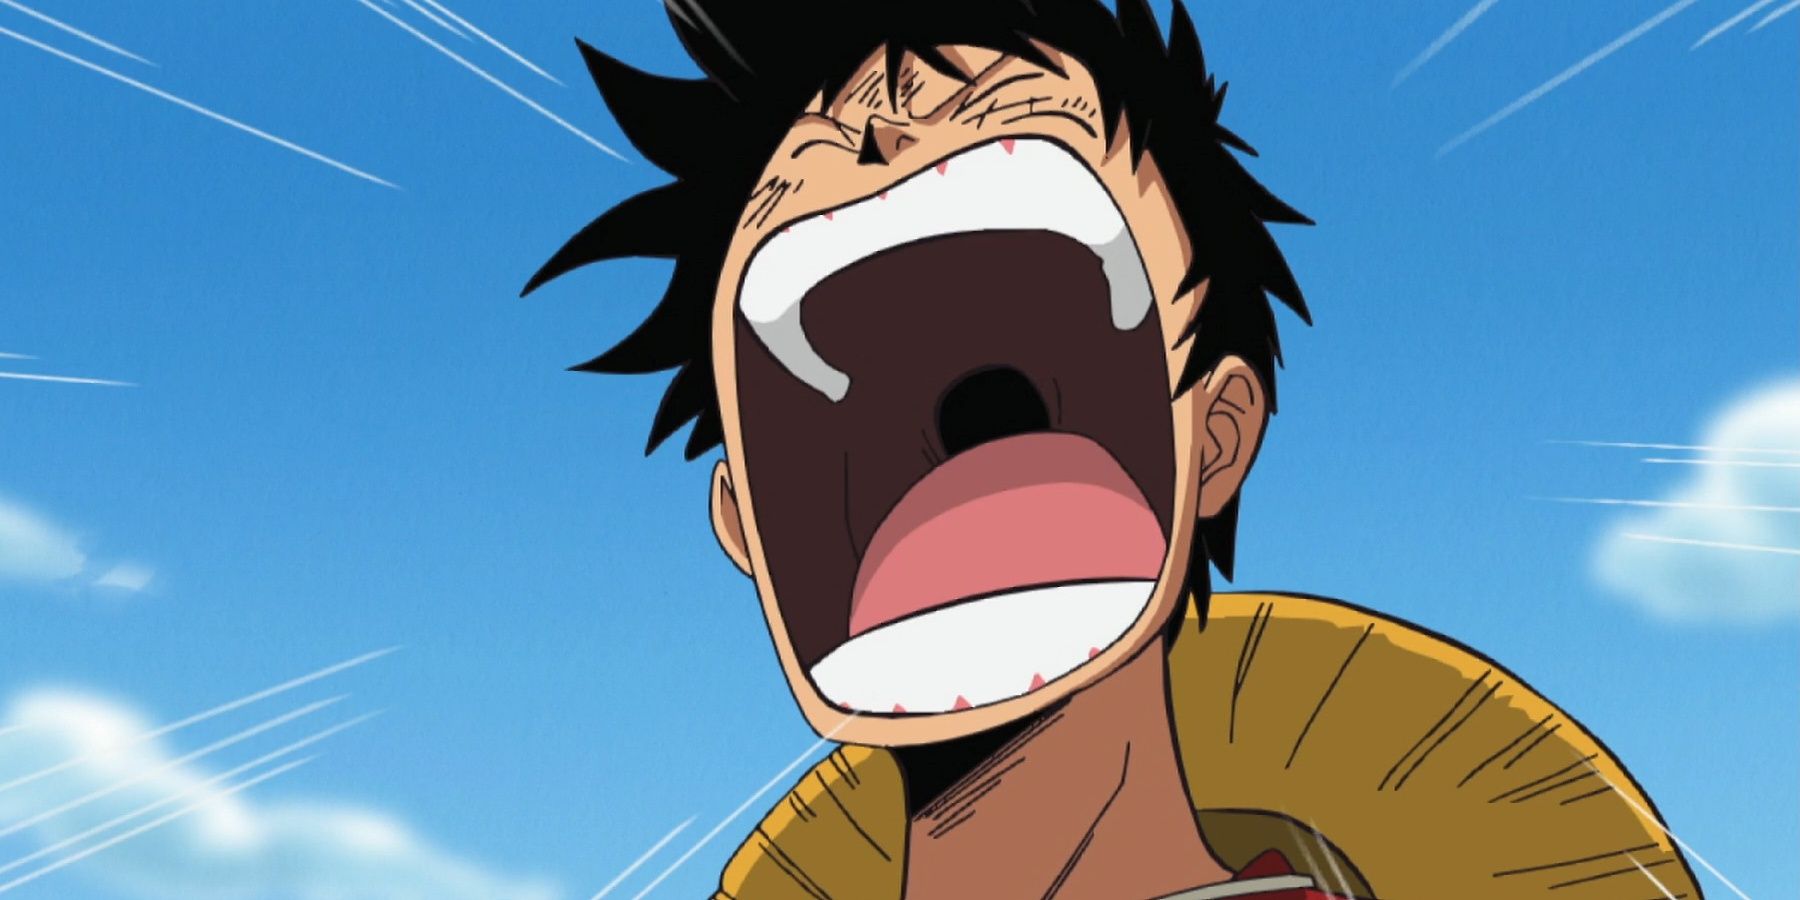 Luffy shouts with passion against a blue sky.